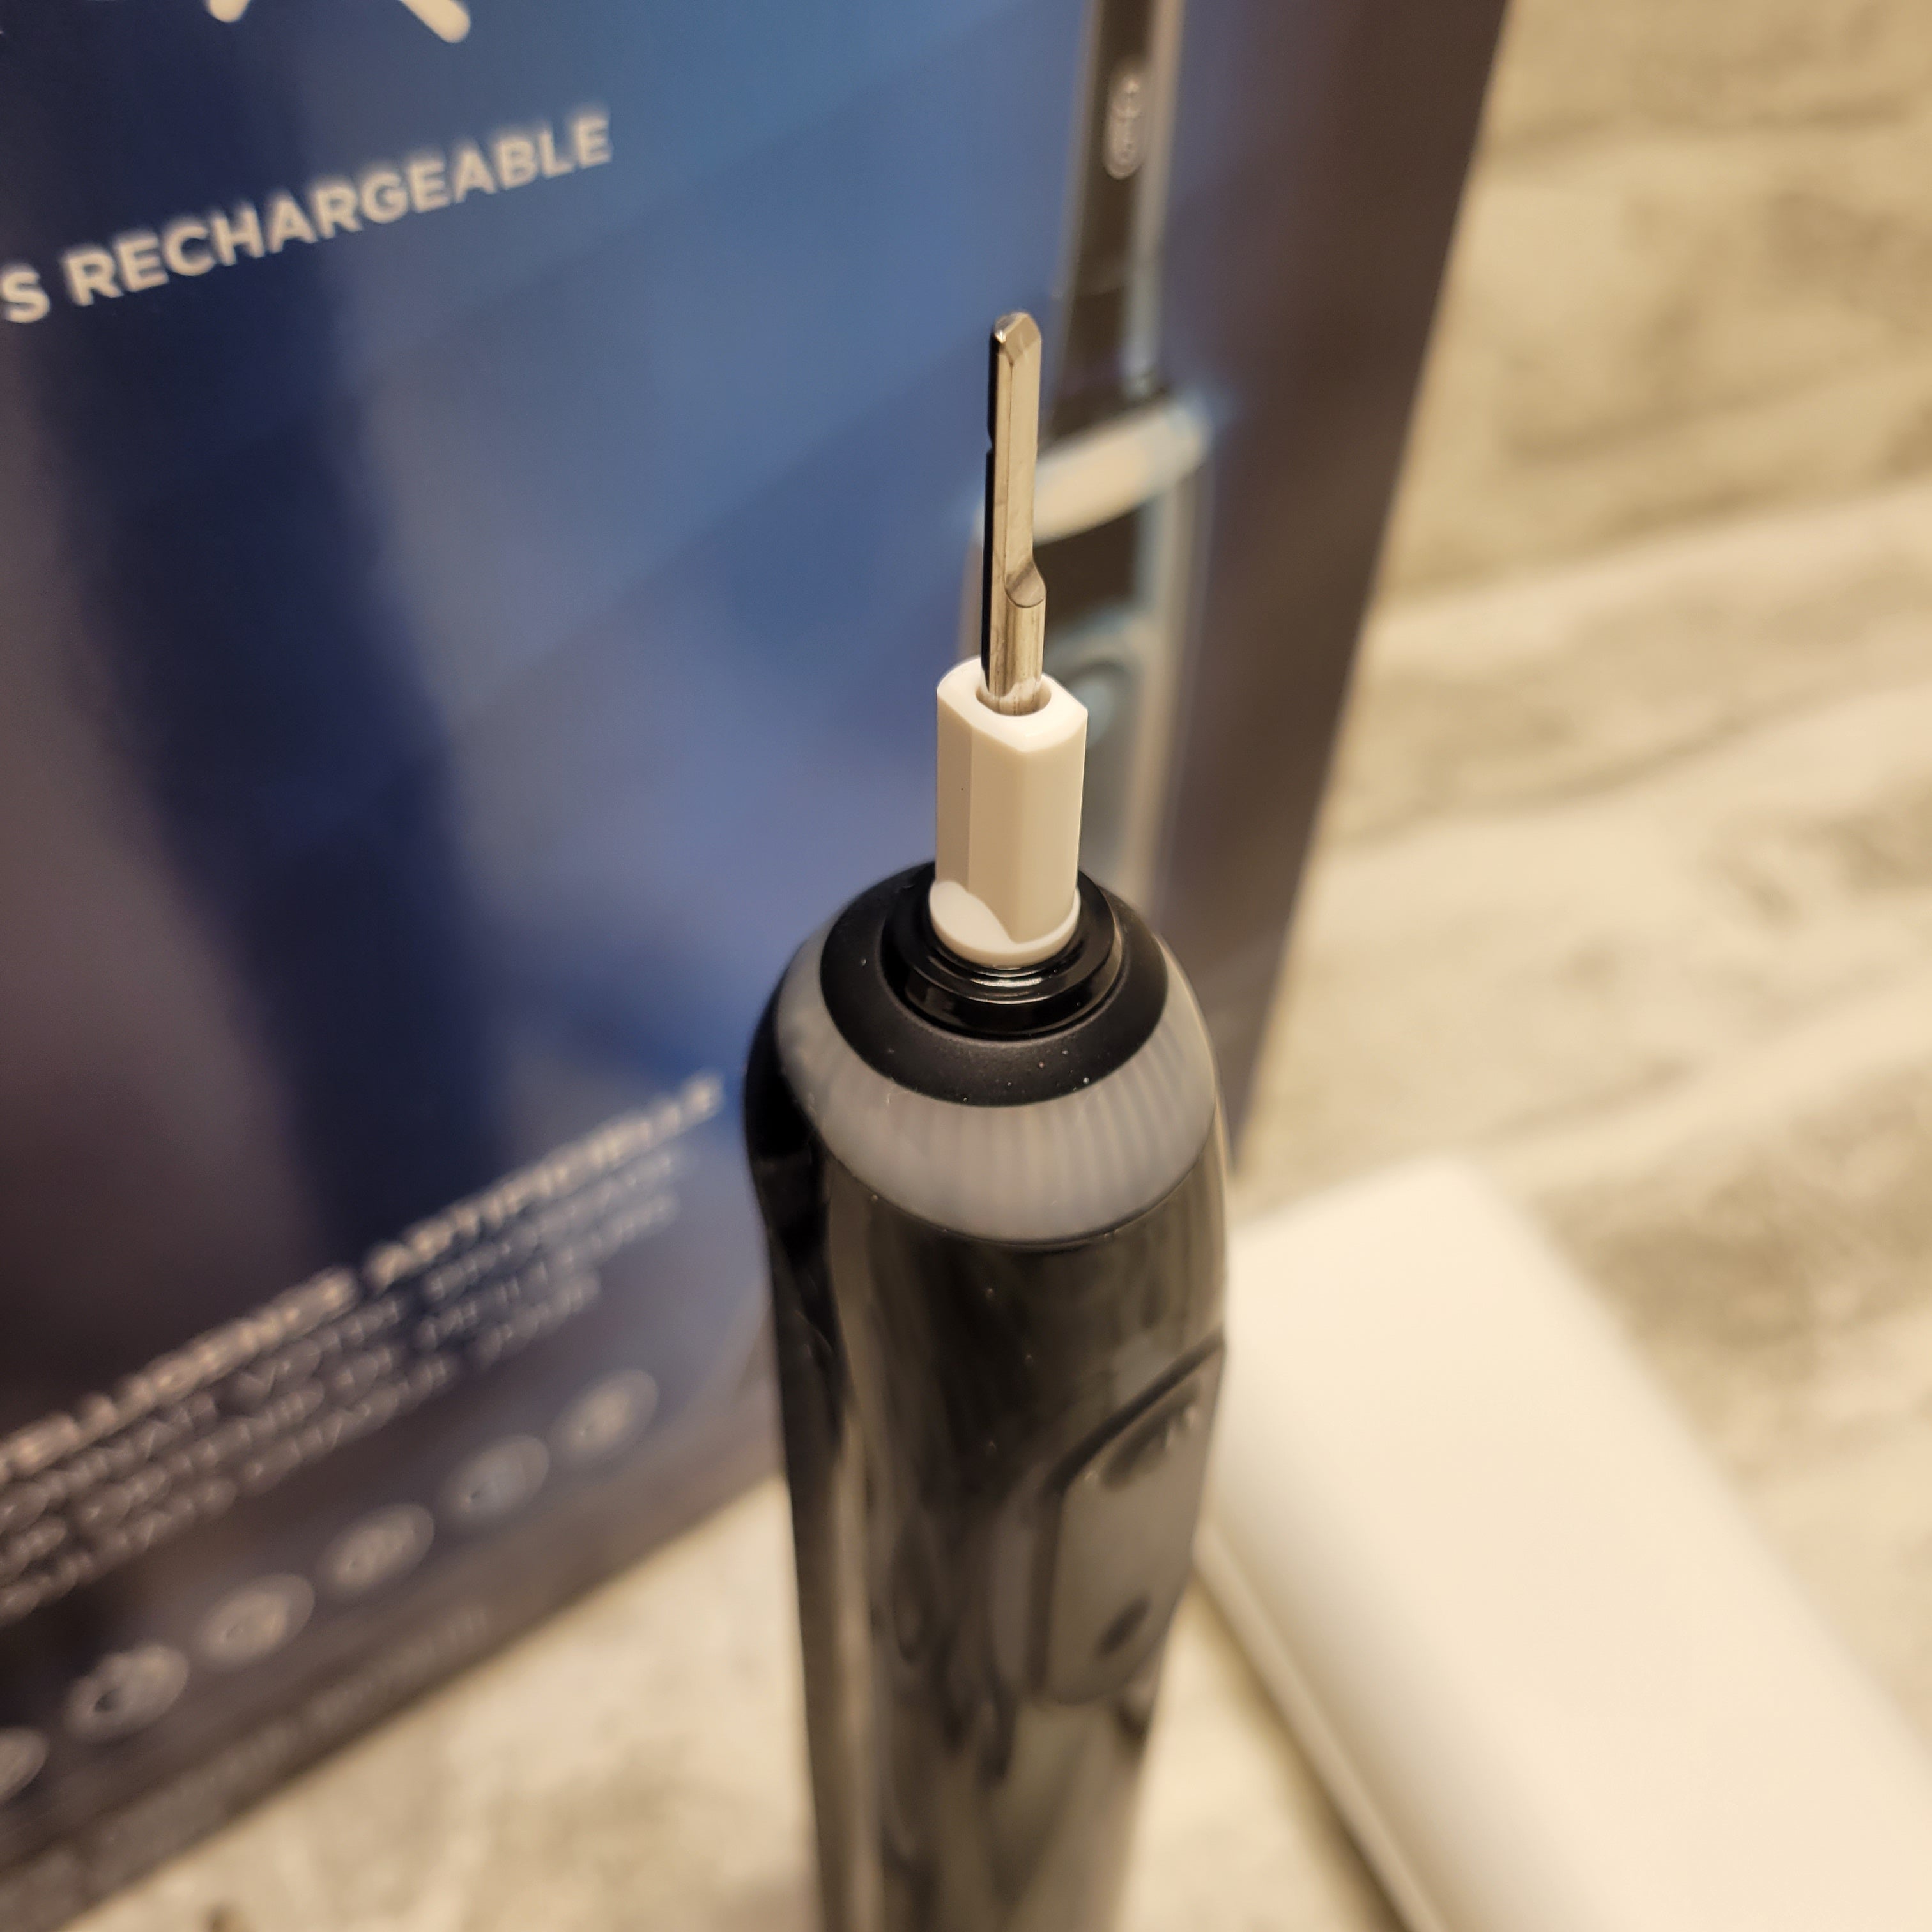 Oral-B Genius X Limited, Electric Toothbrush (7610187153646)